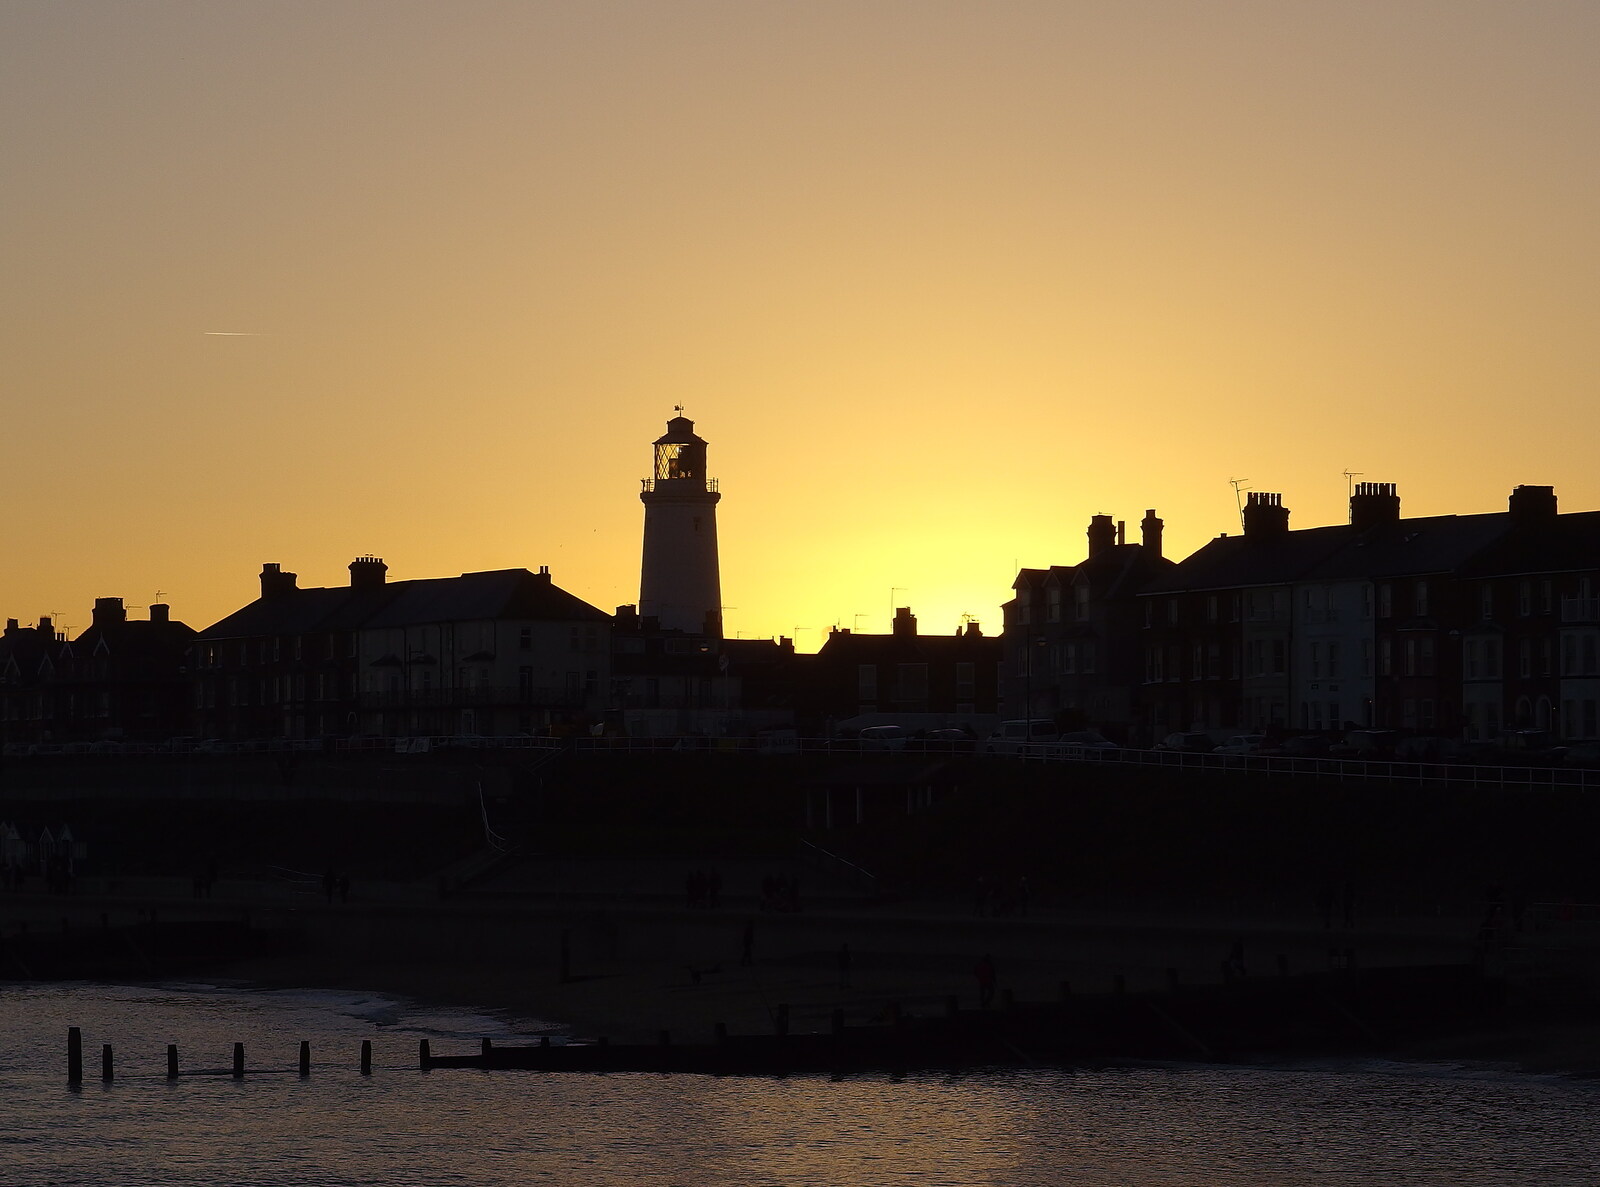 The sun sets behind the lighthouse from Post-Christmas Southwold, Suffolk - 29th December 2013